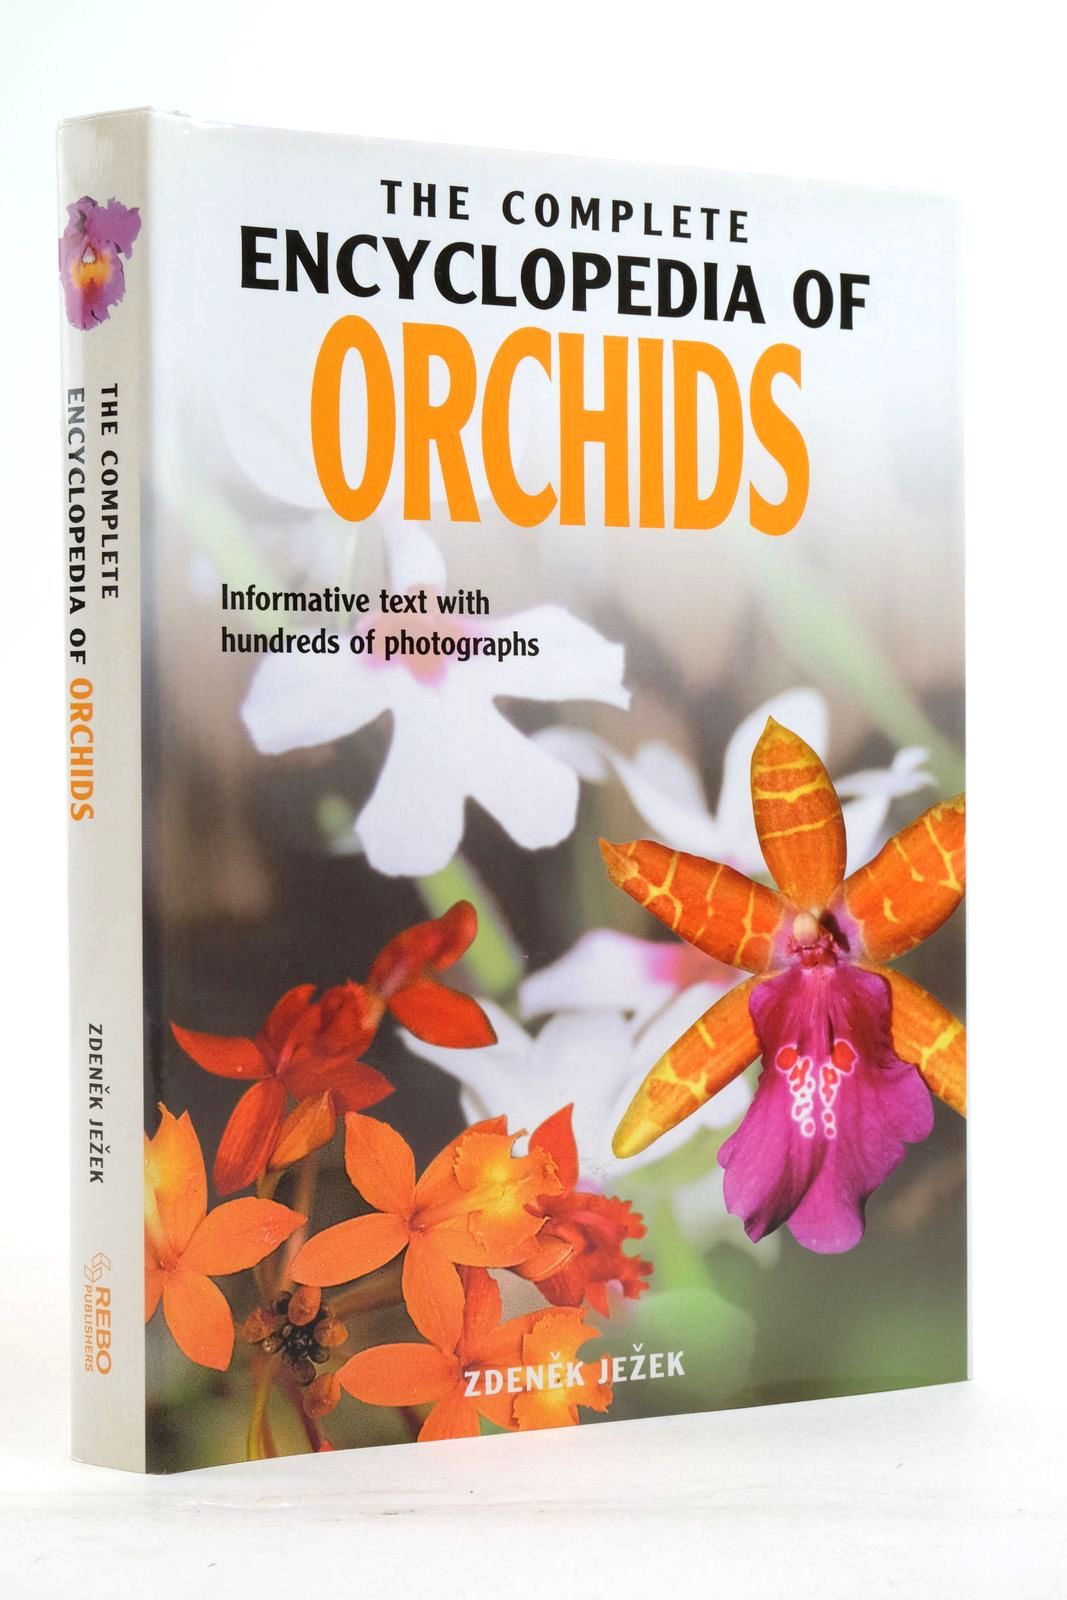 Photo of THE COMPLETE ENCYCLOPEDIA OF ORCHIDS written by Jezek, Zdenek published by Rebo Publishers (STOCK CODE: 2137983)  for sale by Stella & Rose's Books